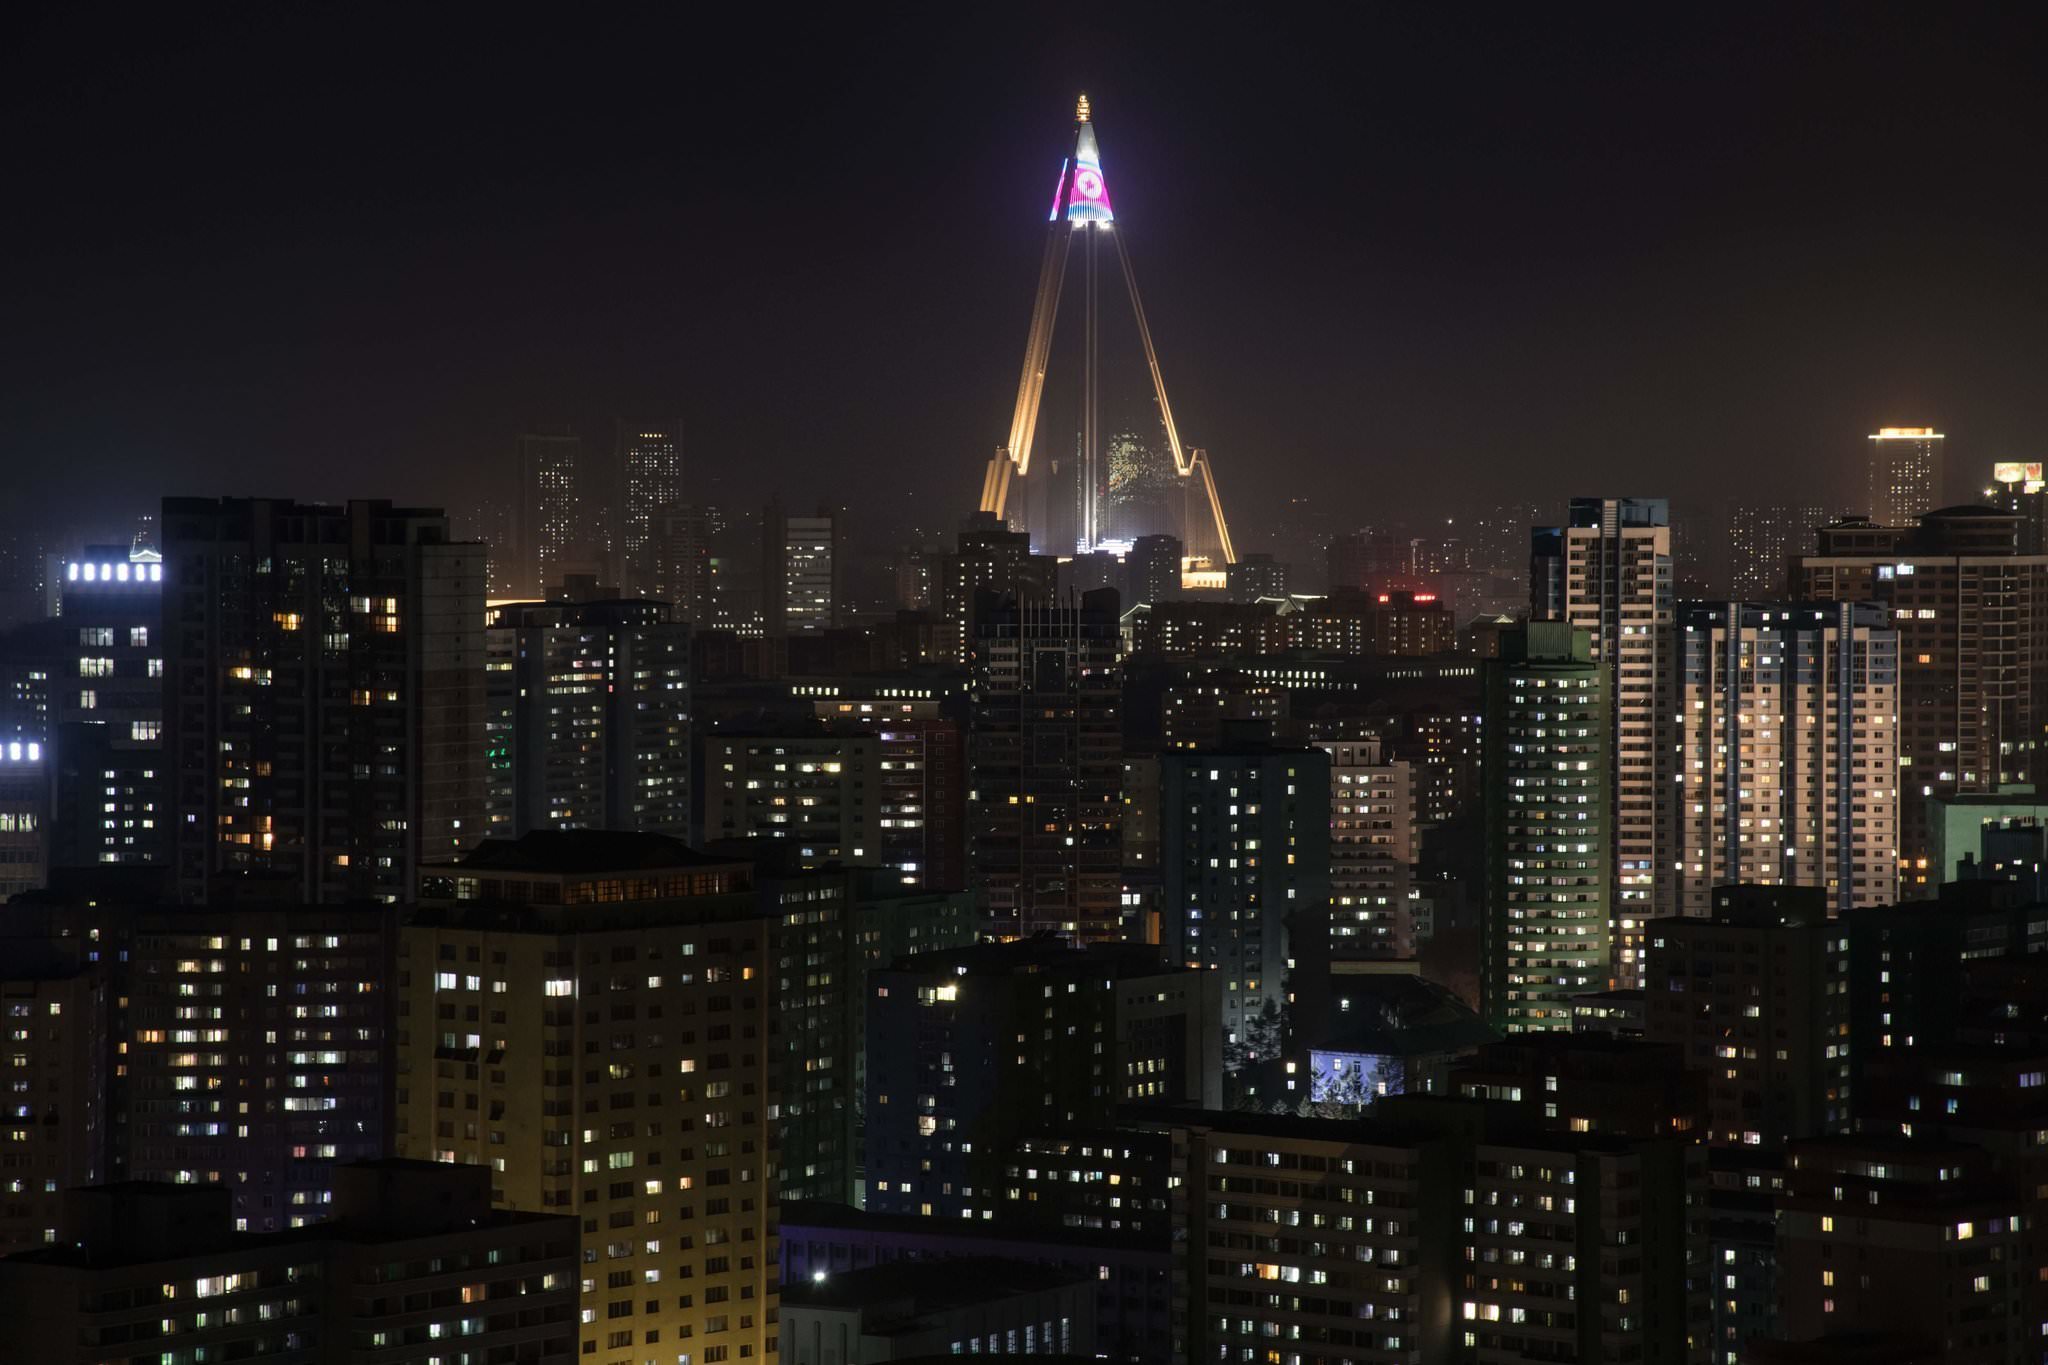 Pyongyang S Giant Pyramid Puts On A Massive Light Show